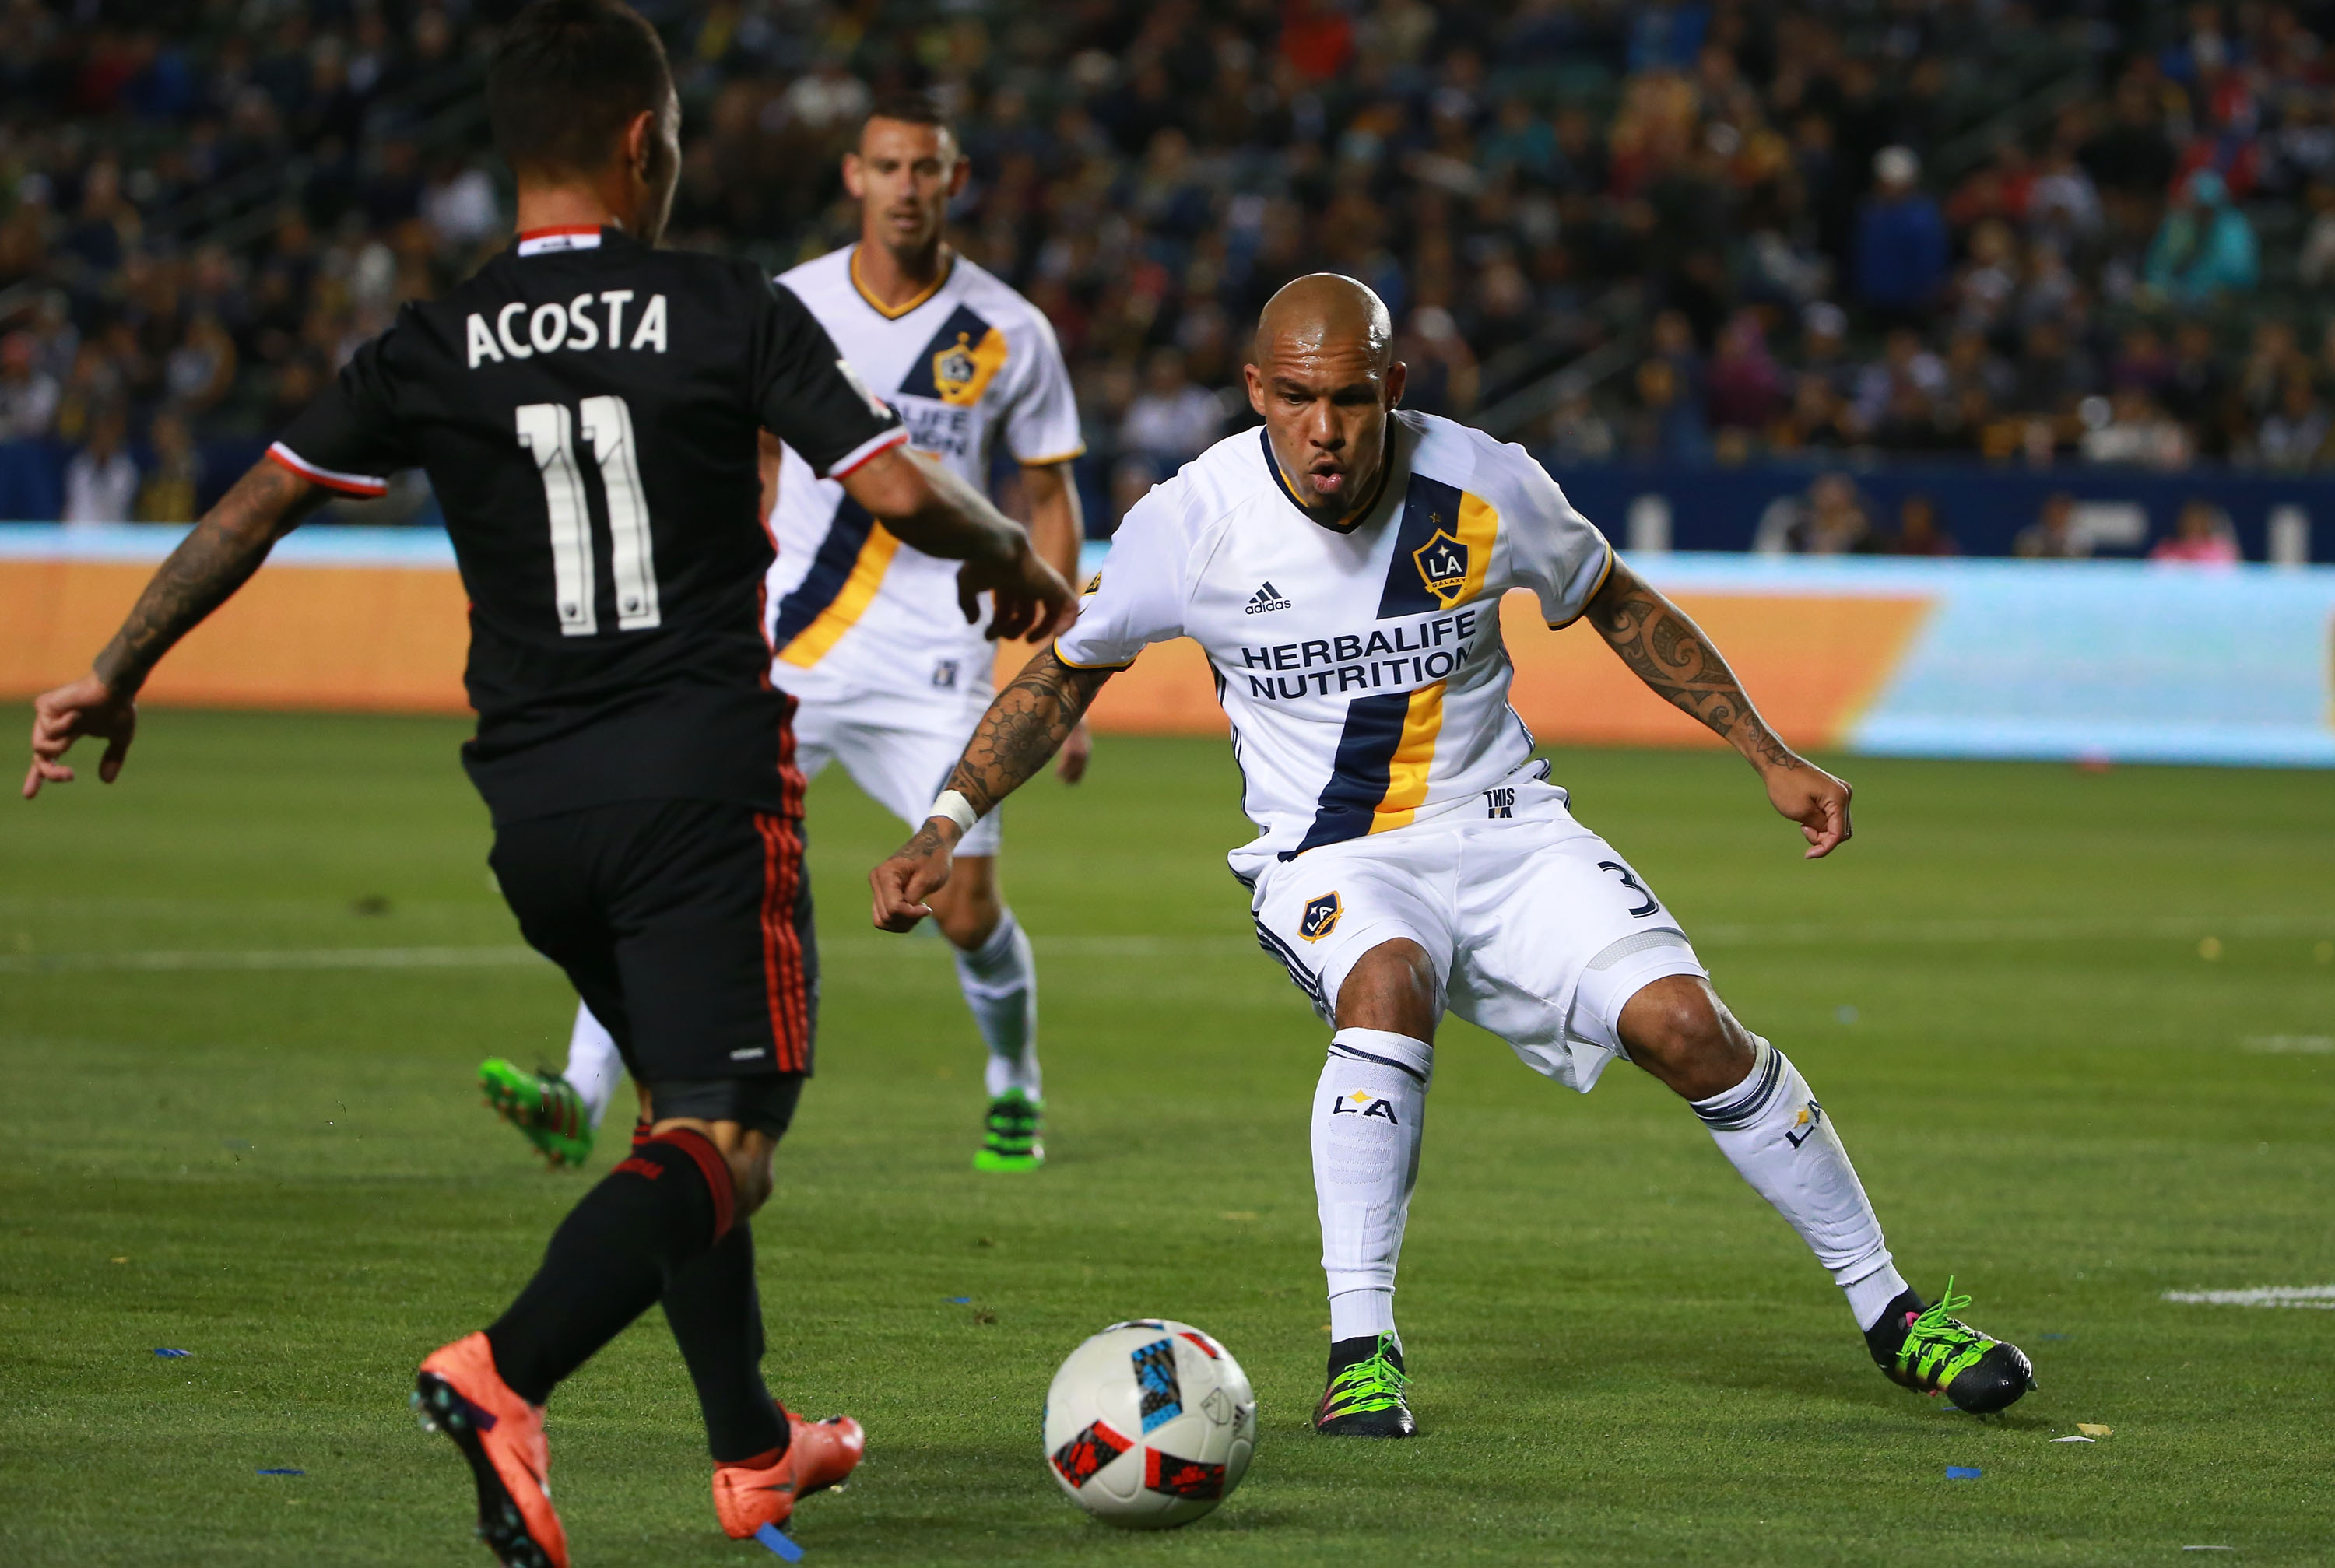 Los Angeles Galaxy vs Real Salt Lake: Preview and Prediction ahead of their MLS clash this Saturday night..